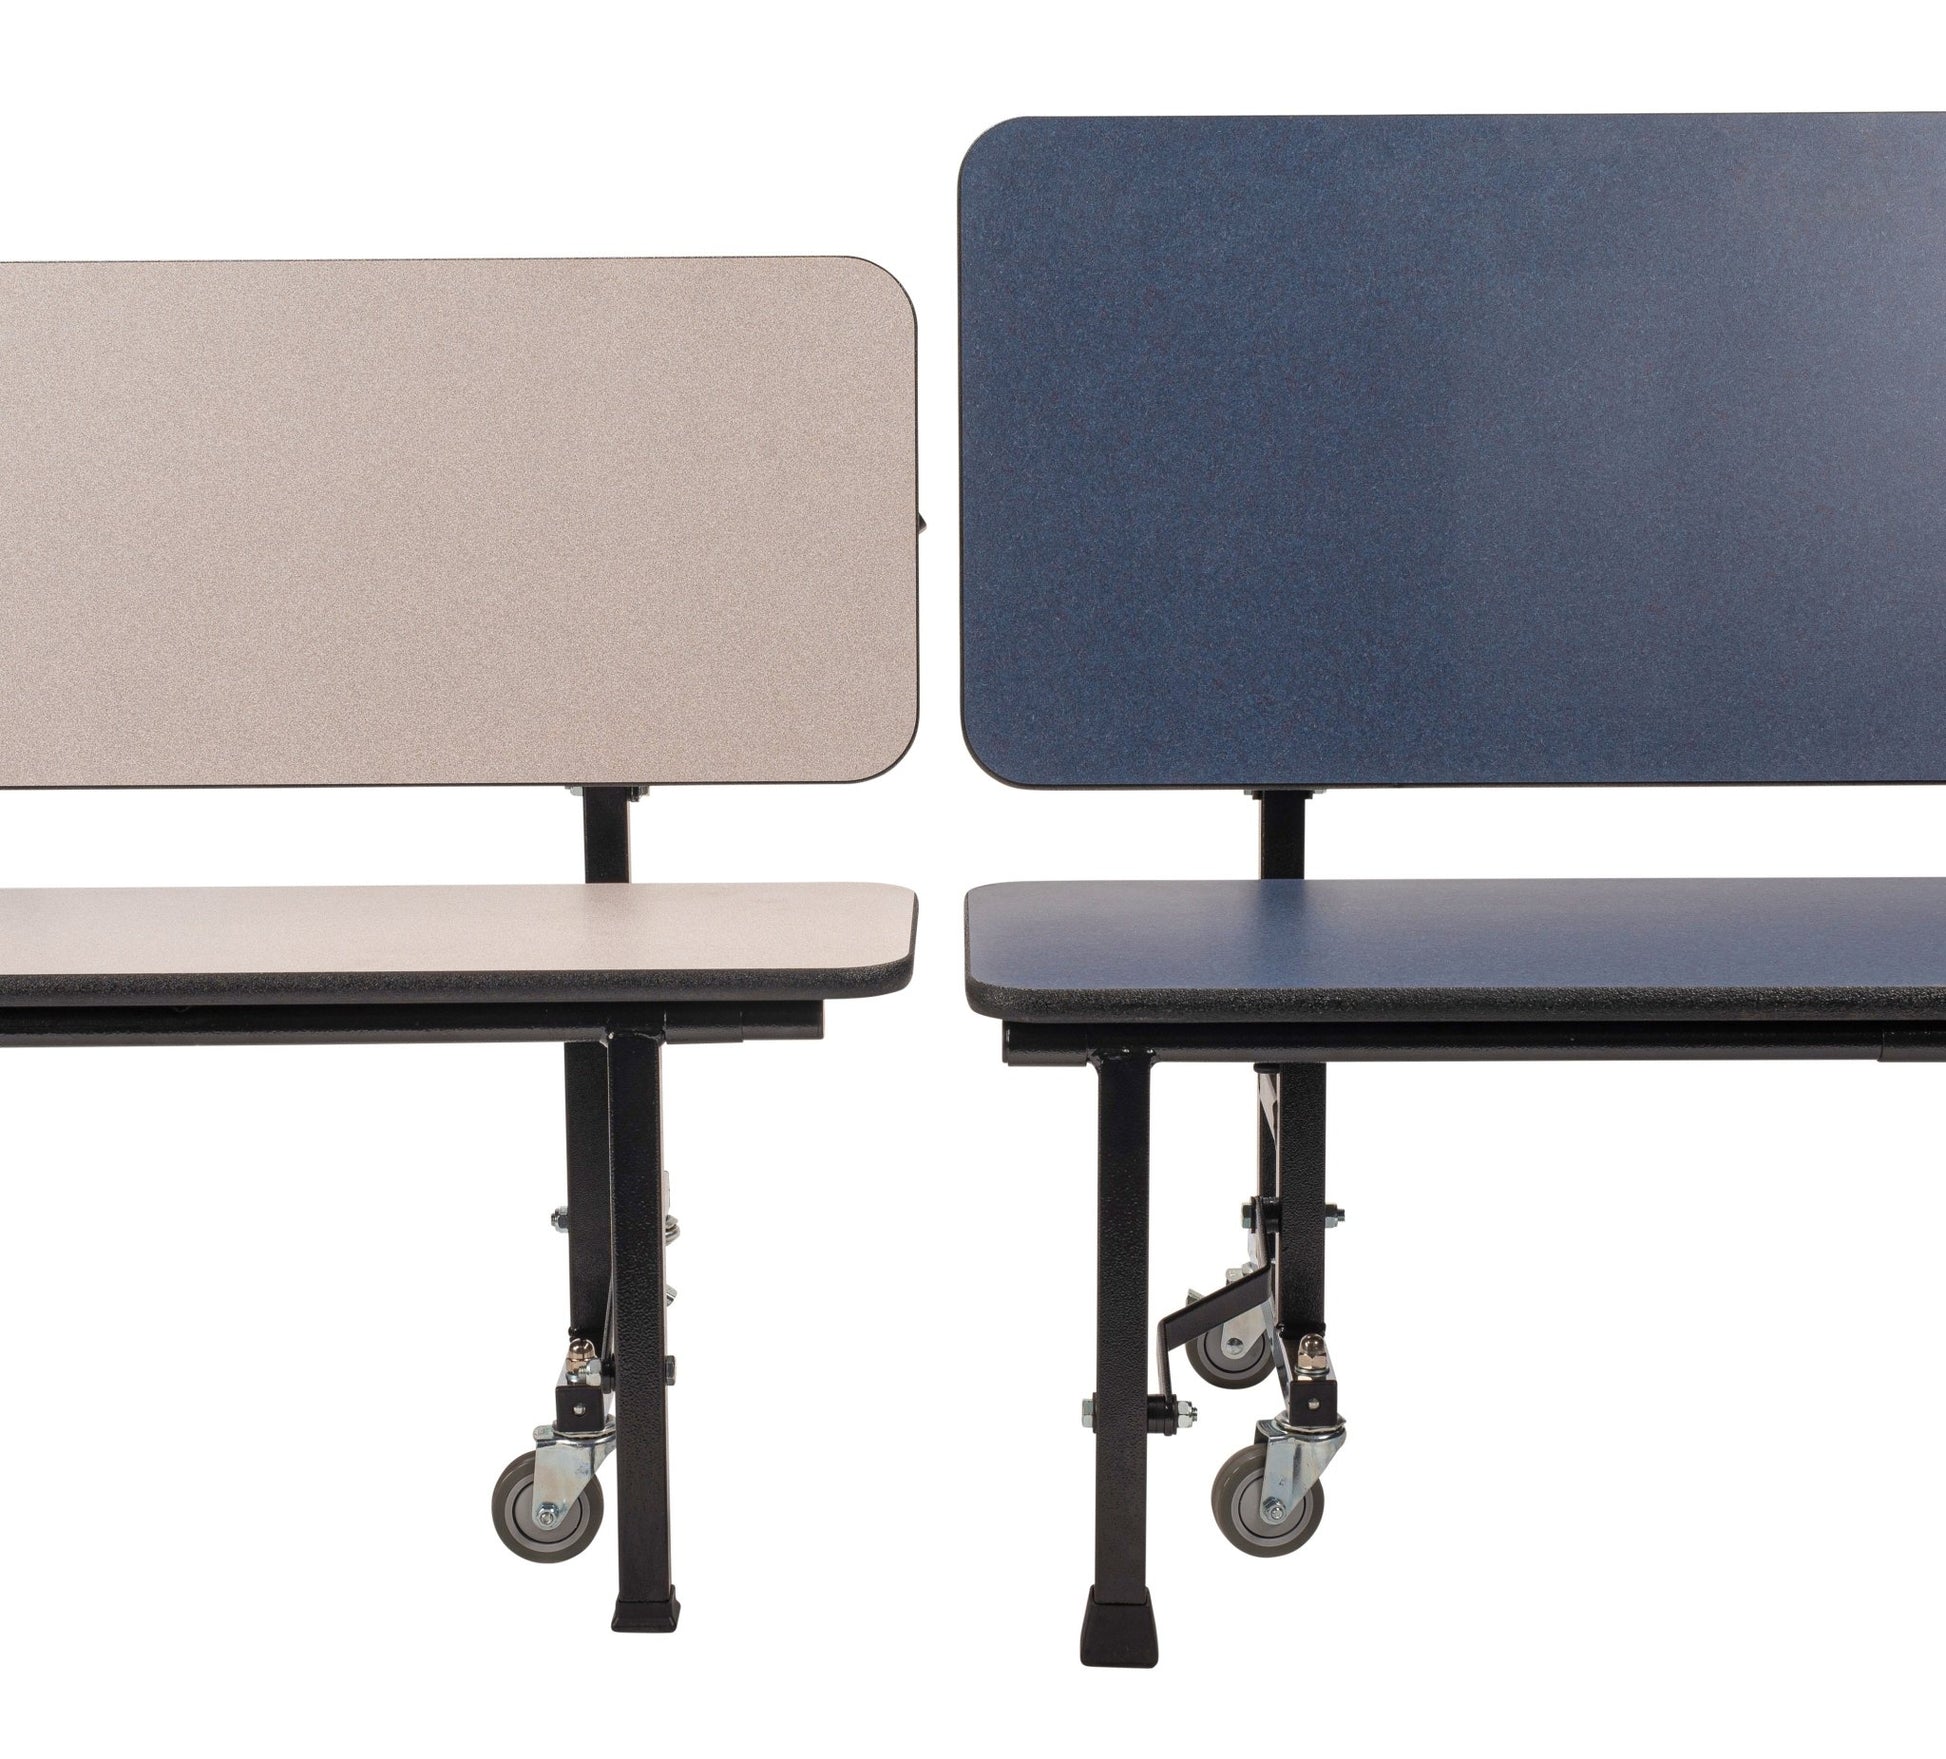 NPS ToGo Bench, 48", MDF Core (National Public Seating NPS-TGB48MDPE) - SchoolOutlet